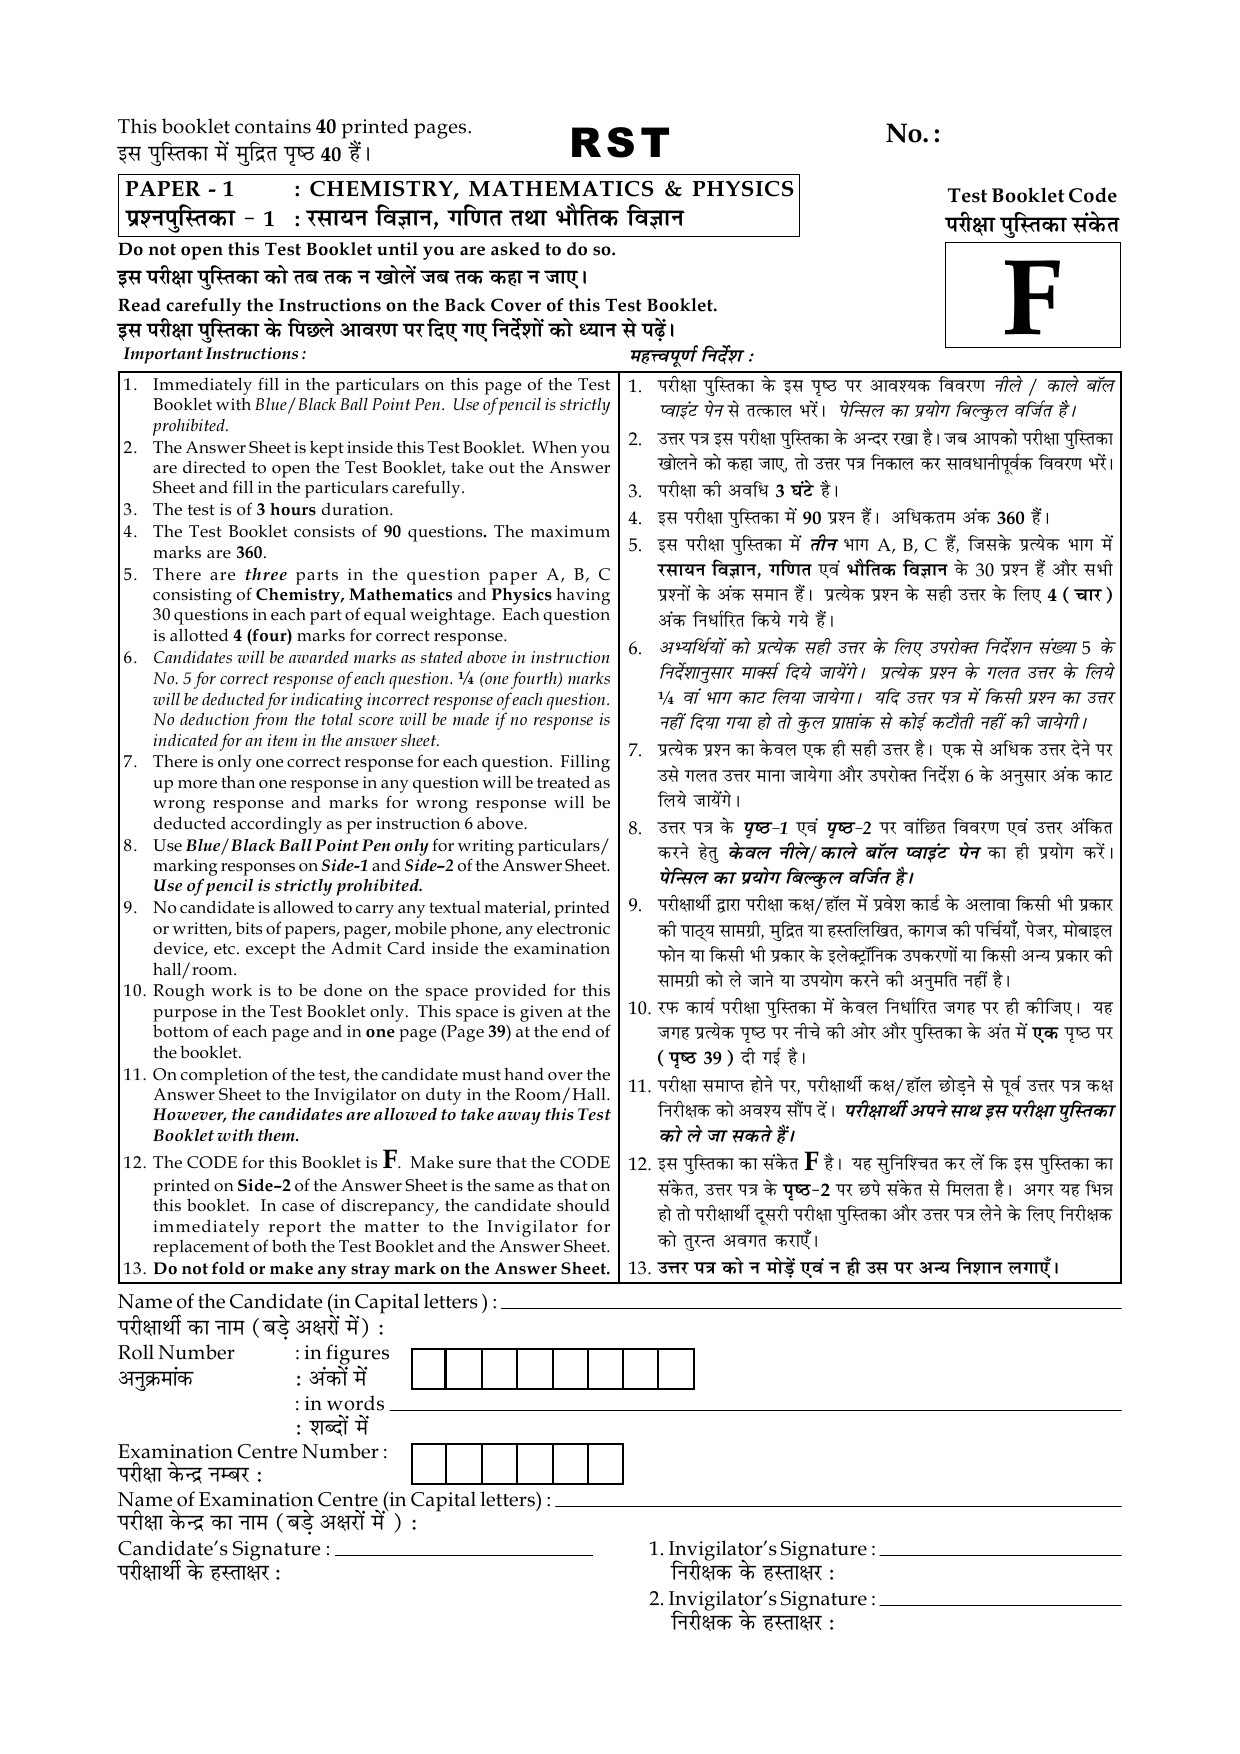 JEE Main Exam Question Paper 2014 Booklet F 1